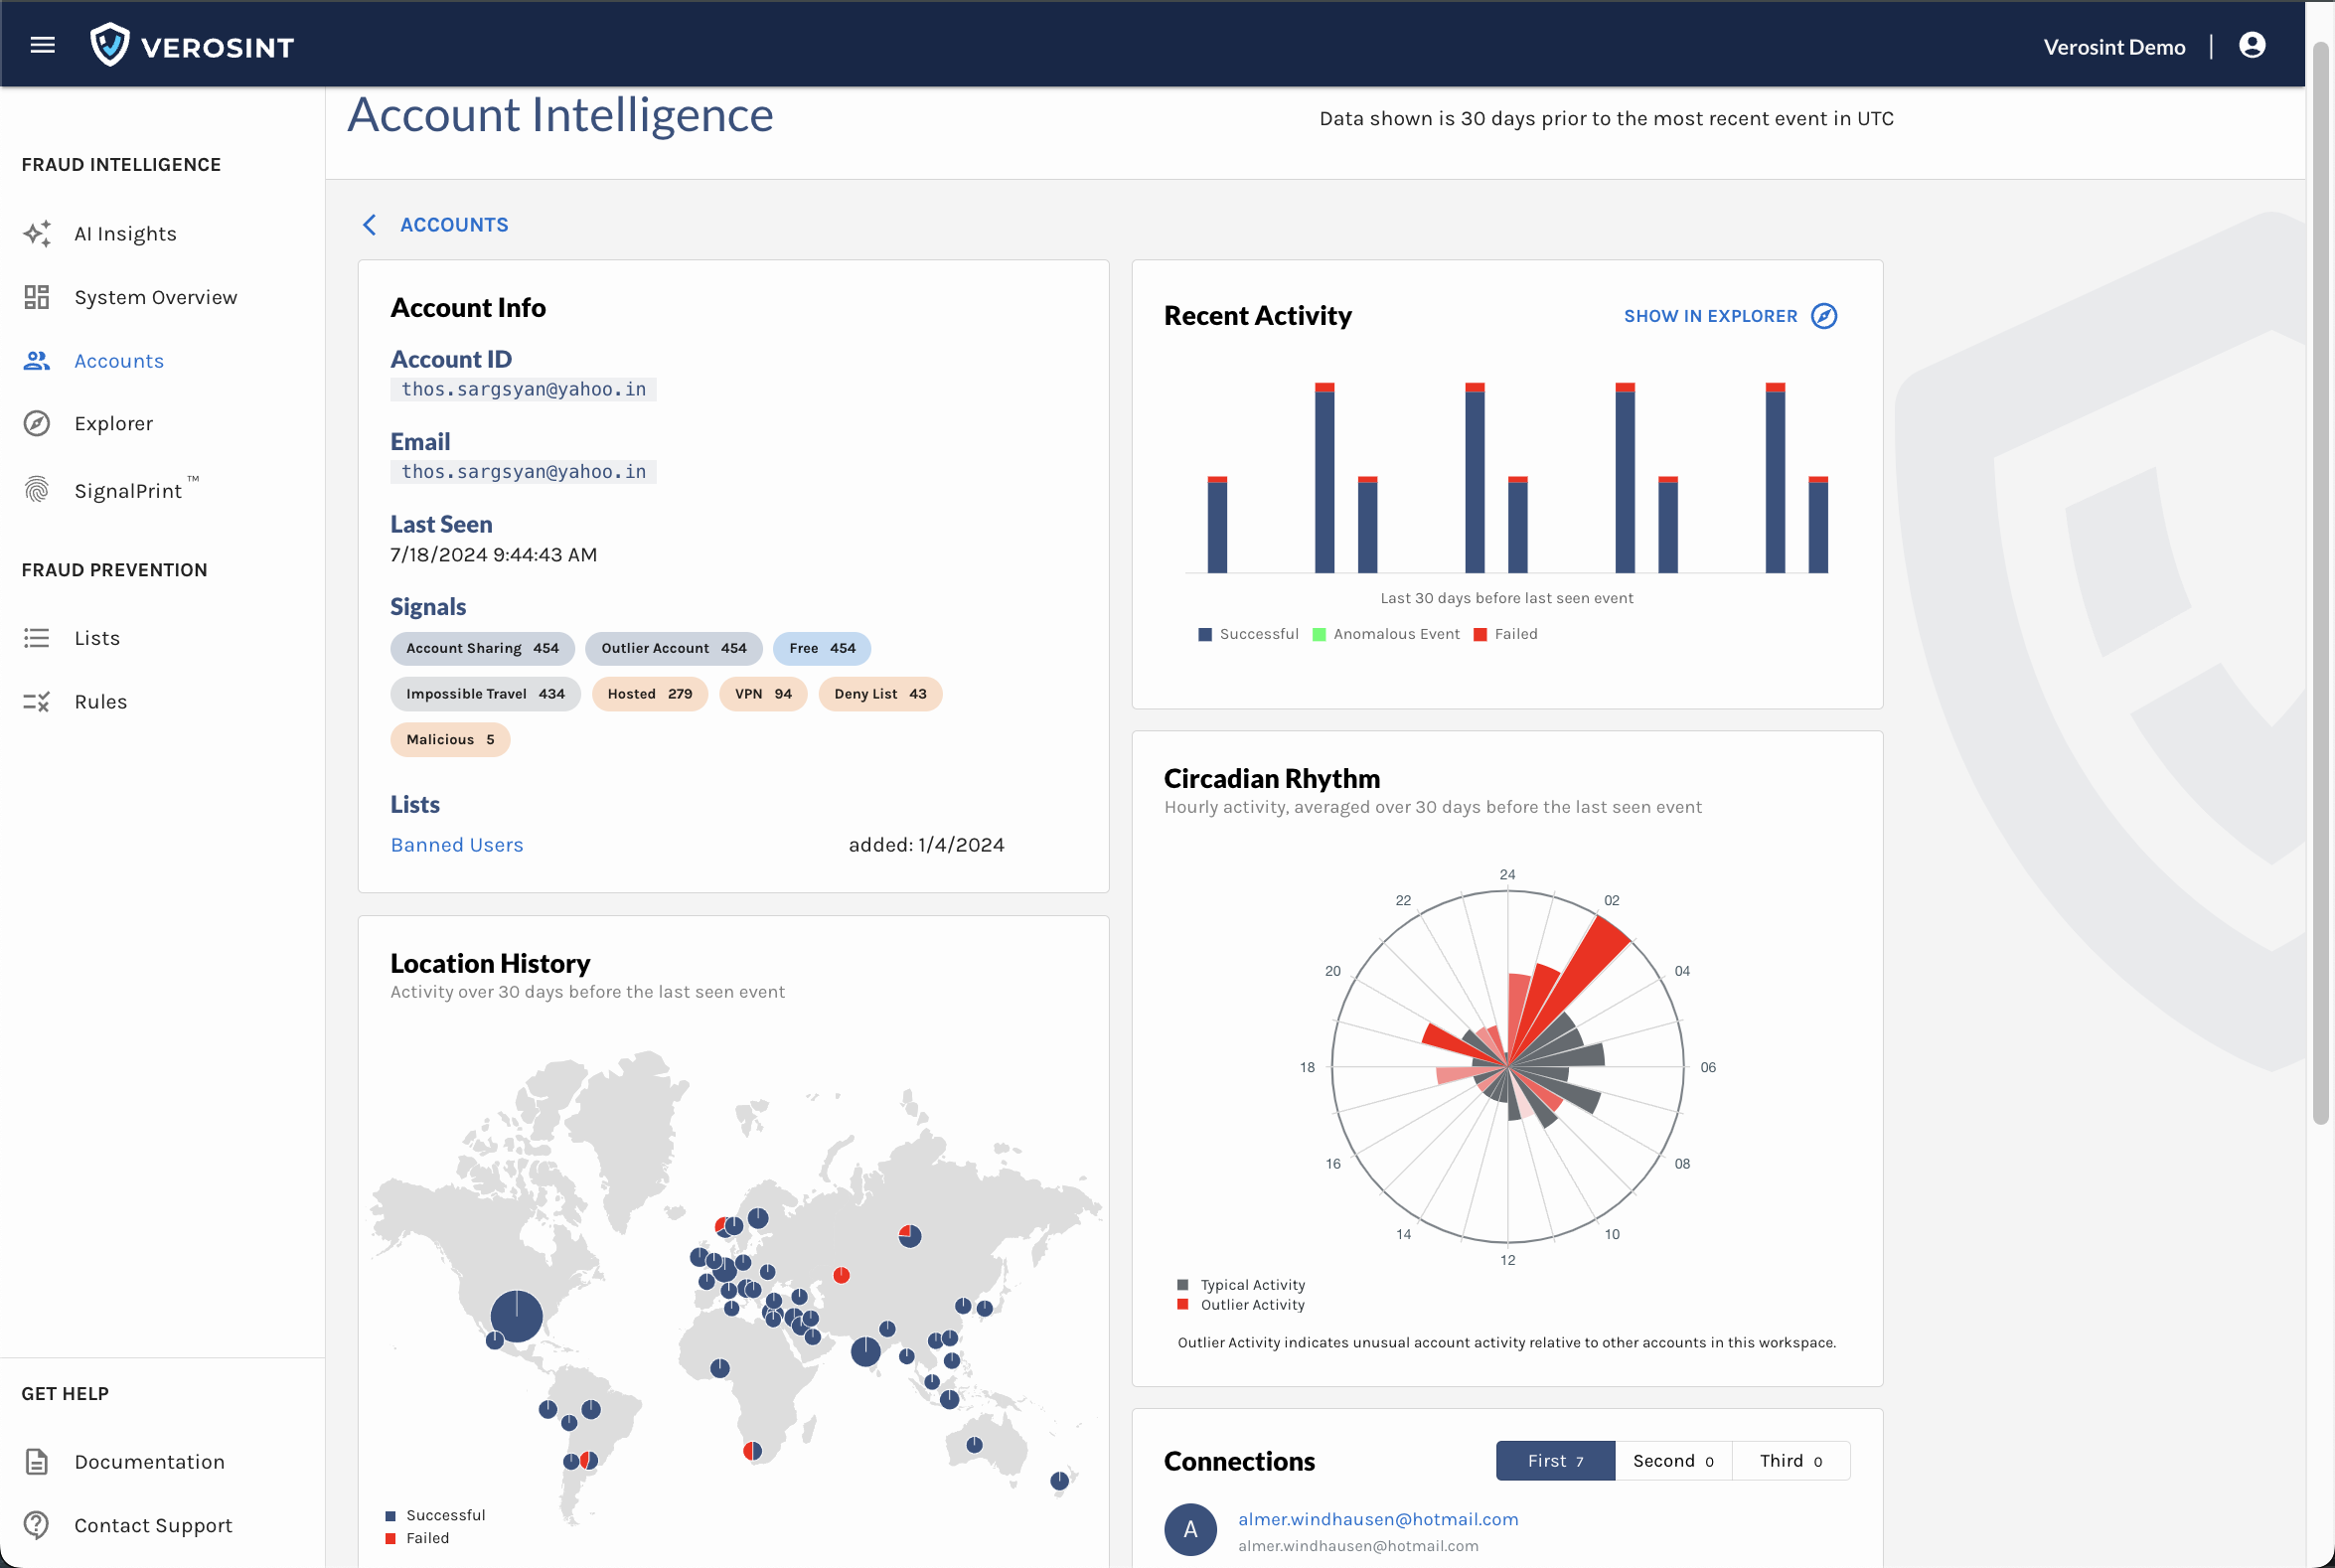 Account Intelligence page example from the Verosint Demo workspace